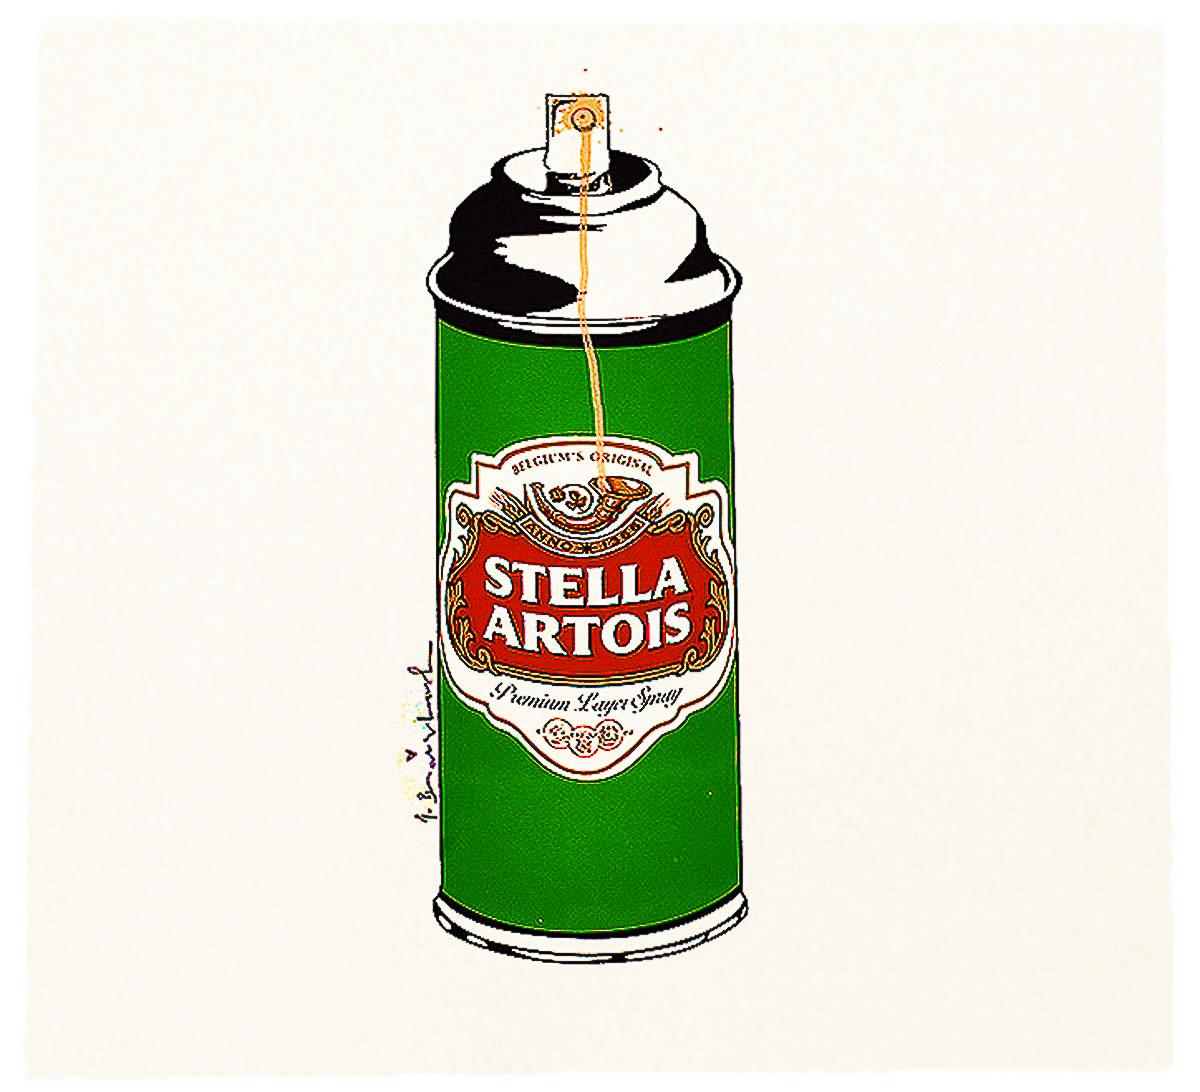 Limited Edition of only 25.
Released in 2016.
Has iconic Stella Artois logo imagery that was re-imagined by the artist for his solo show "Life is Beautiful".
Hand numbered with pencil can image and hand signed by Mr. Brainwash next to the image of